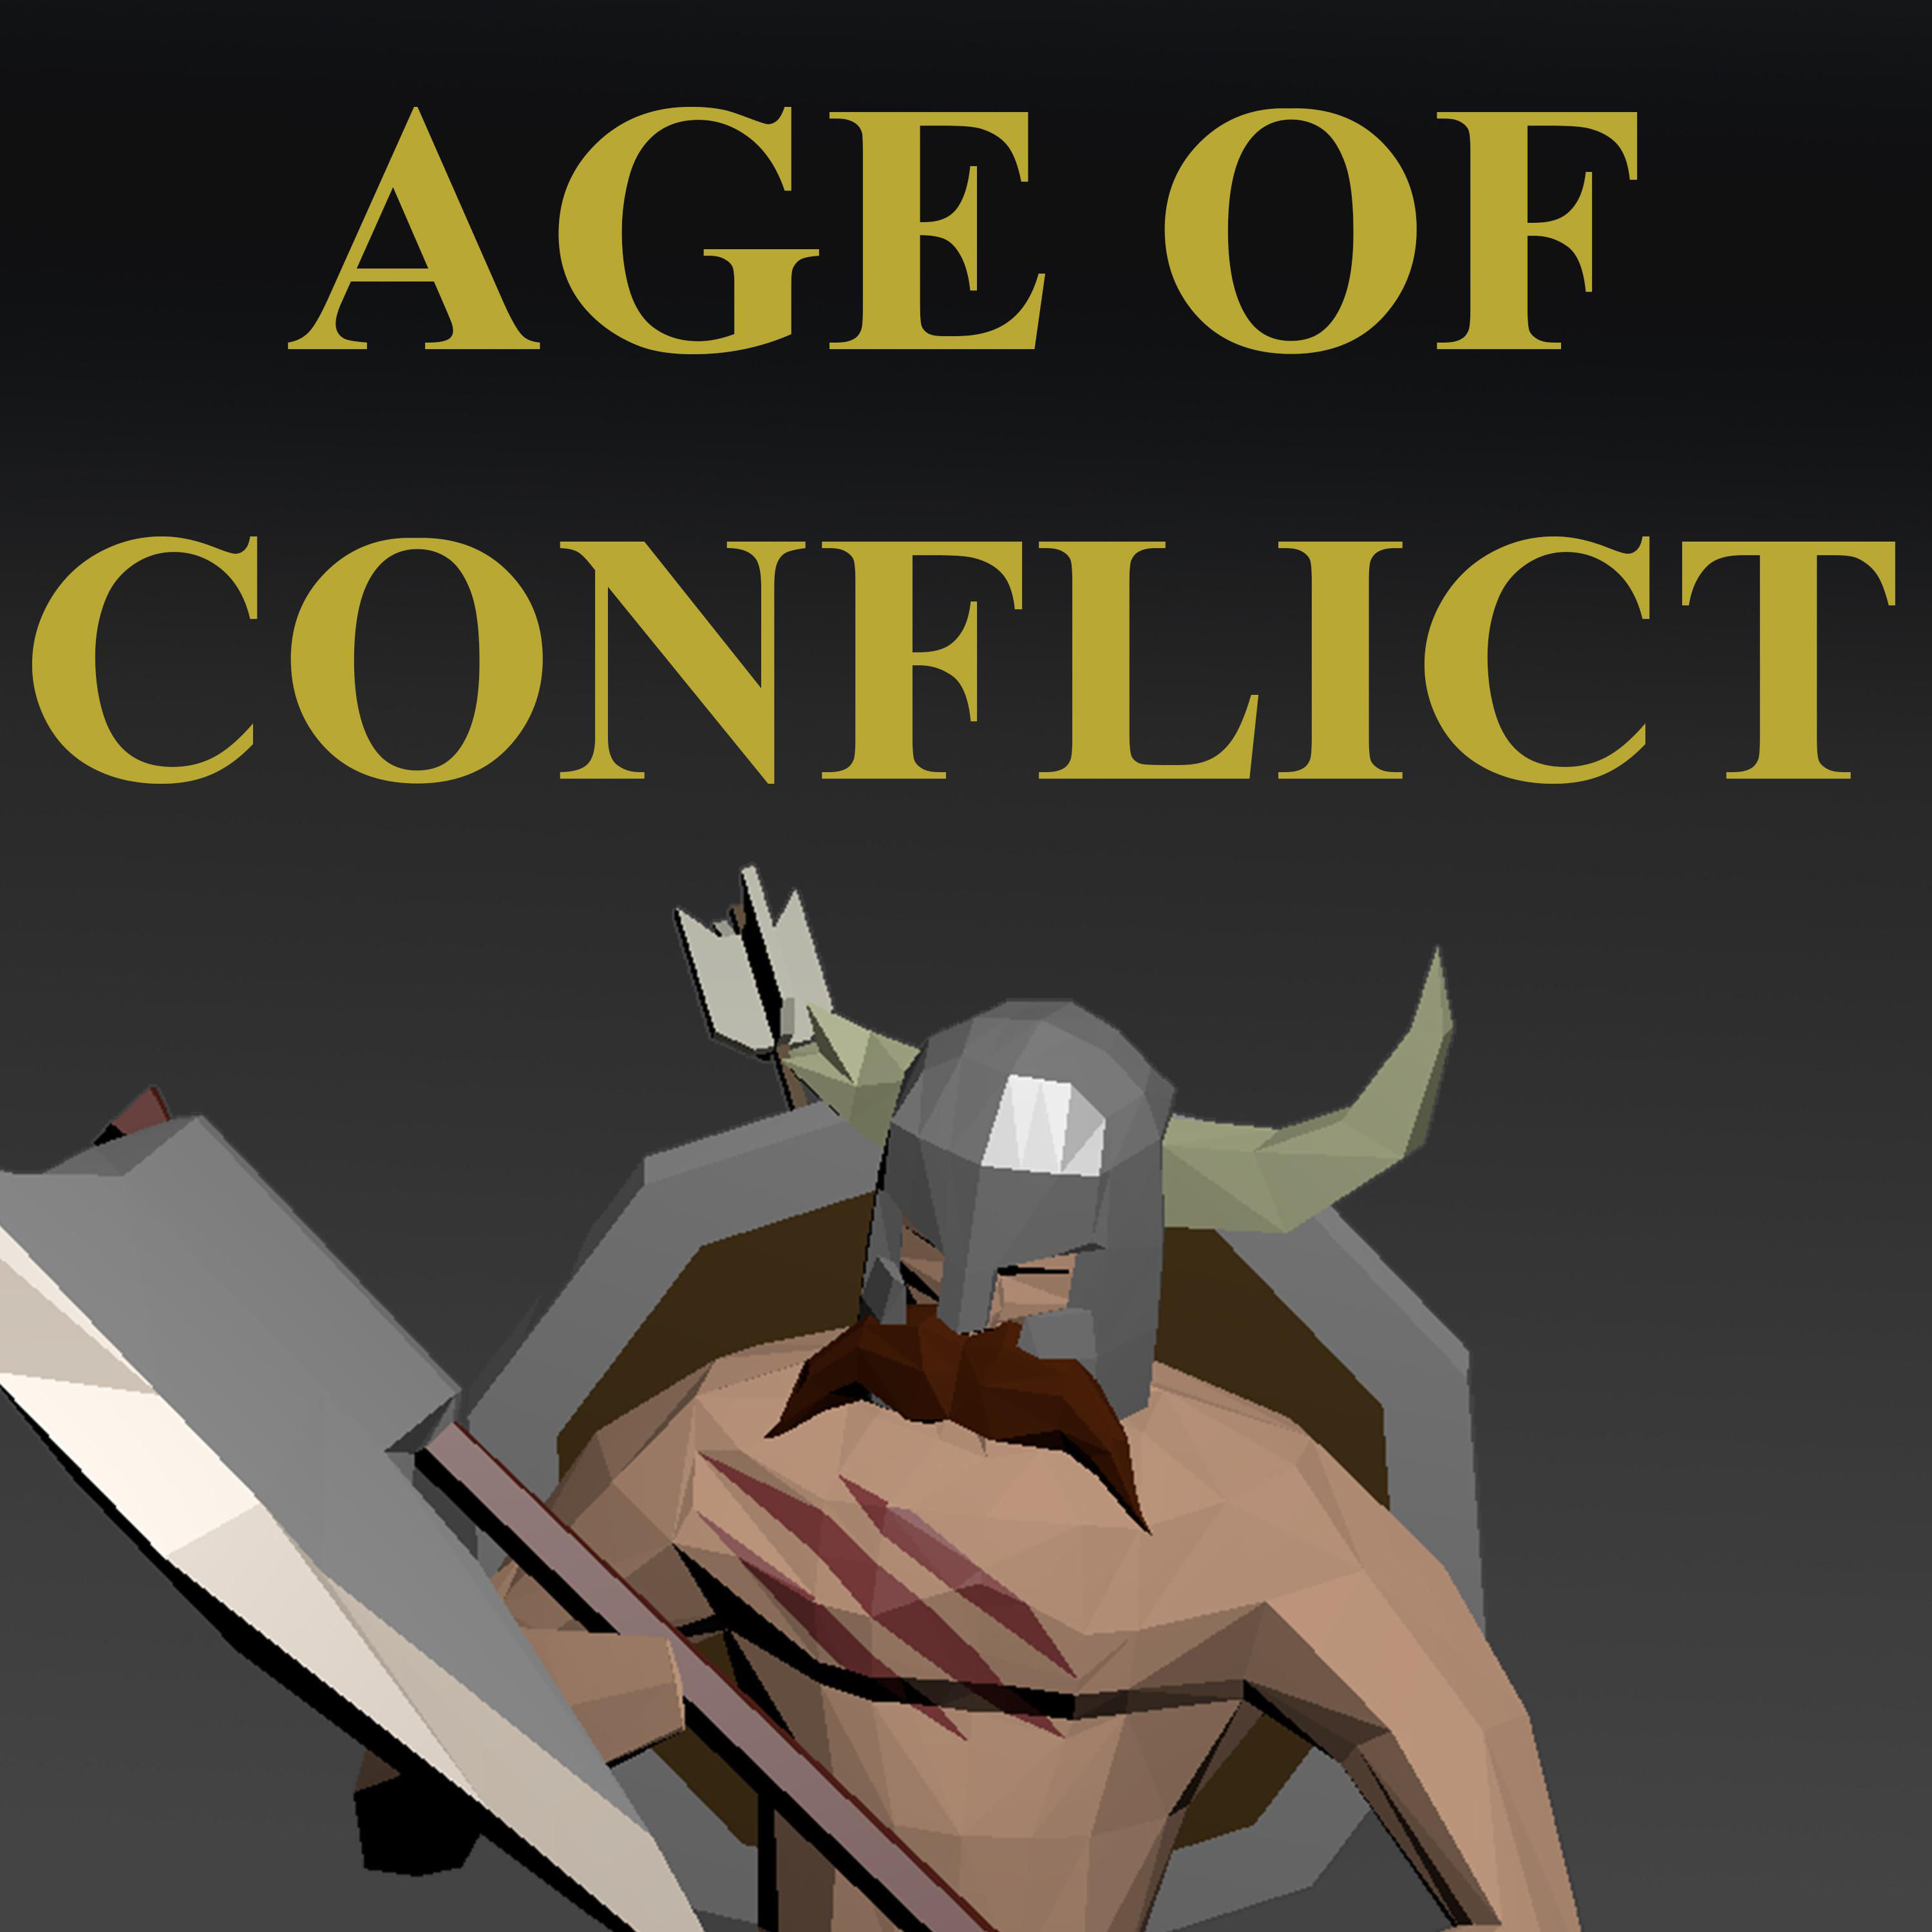 Ages of conflict full version. Age of Conflict. Ages of Conflict 2. Как установить мод на age of Conflict.